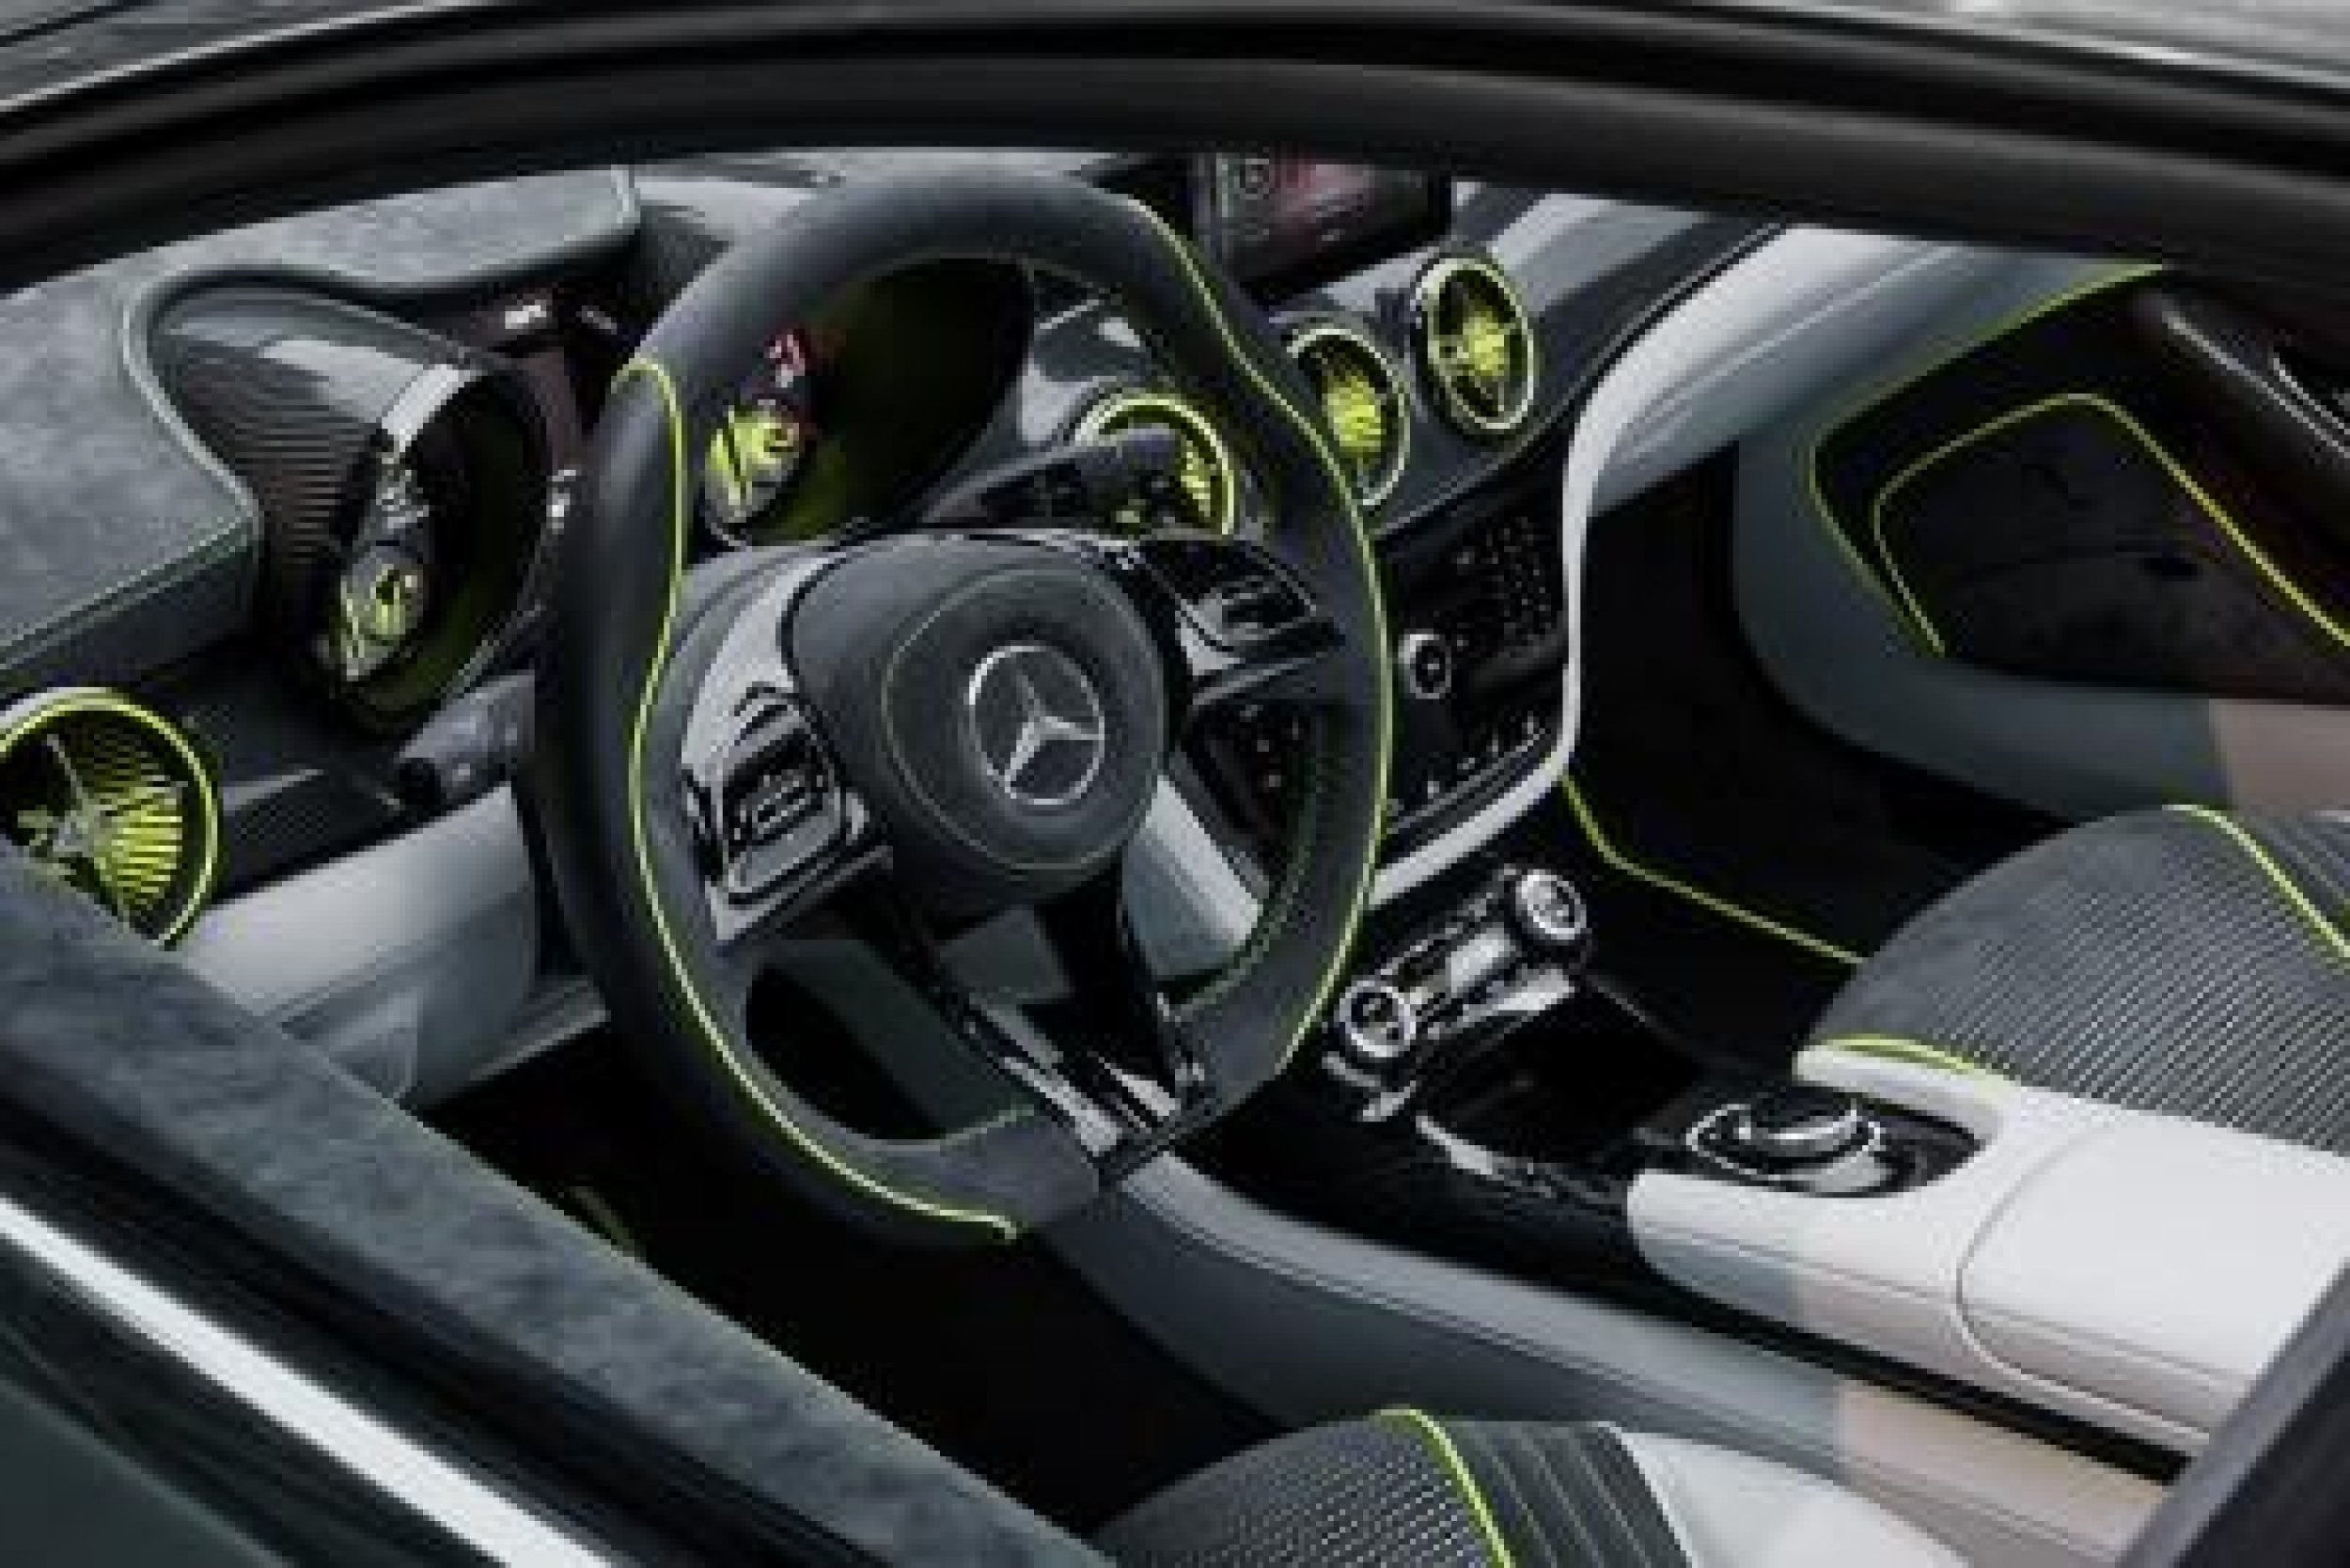 The Mercedes Concept Style Coupes interior seems taken straight from the pages of a comic book.